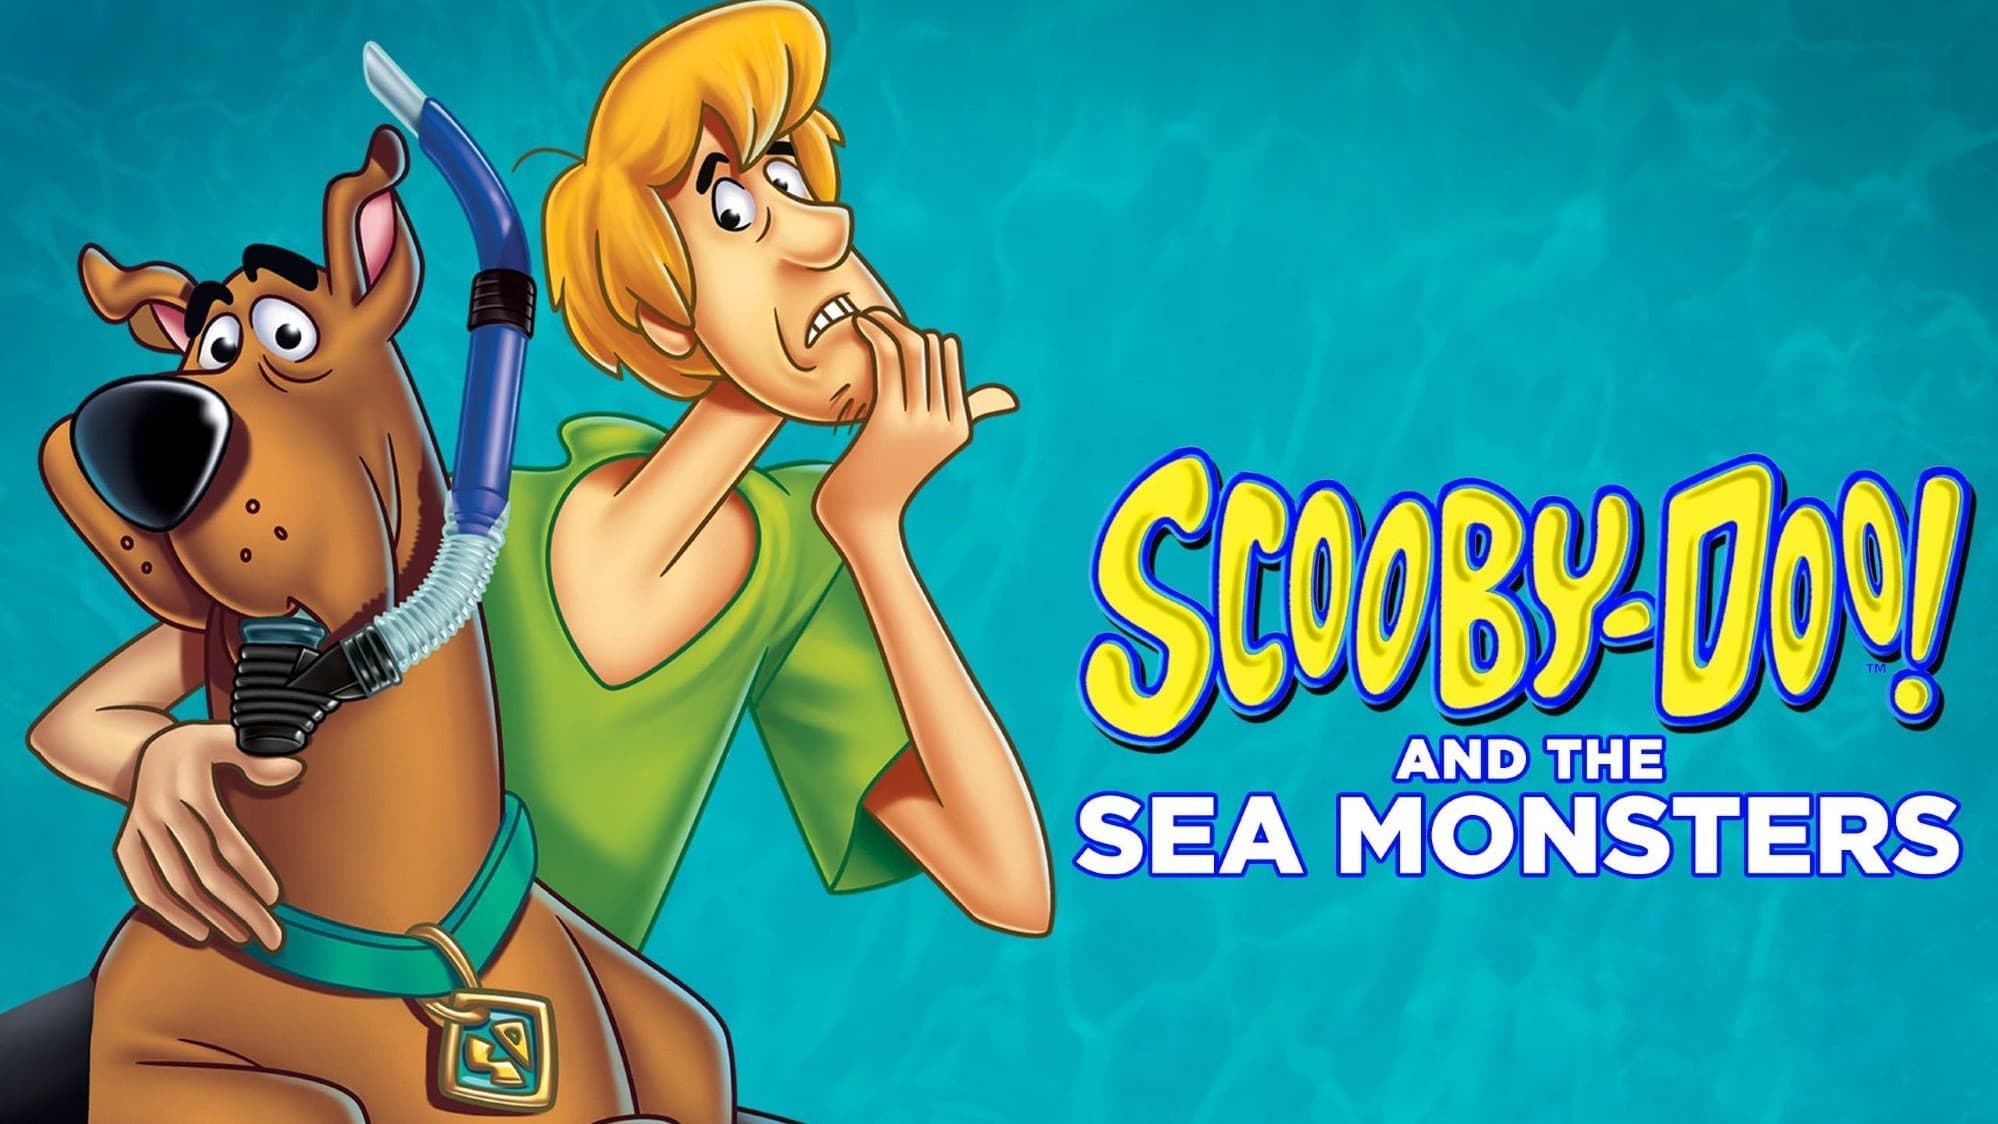 Scooby-Doo! and the Sea Monsters